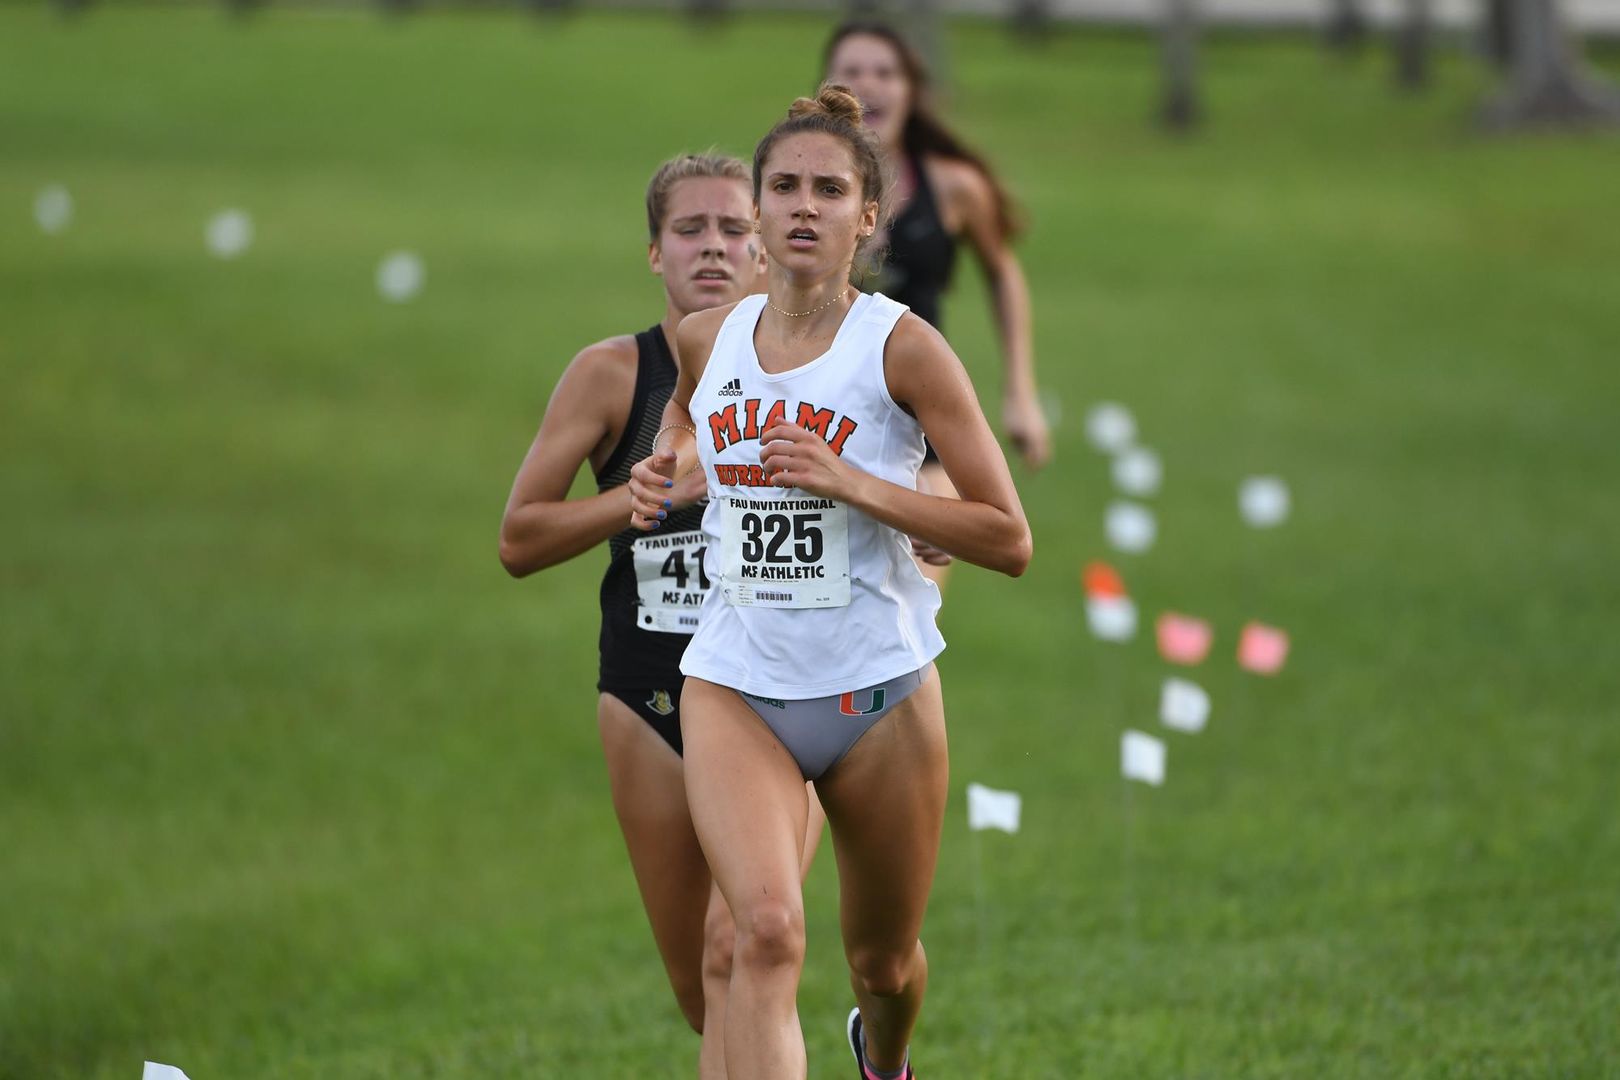 Three Canes Earn Top 10 Finishes at FAU Invitational